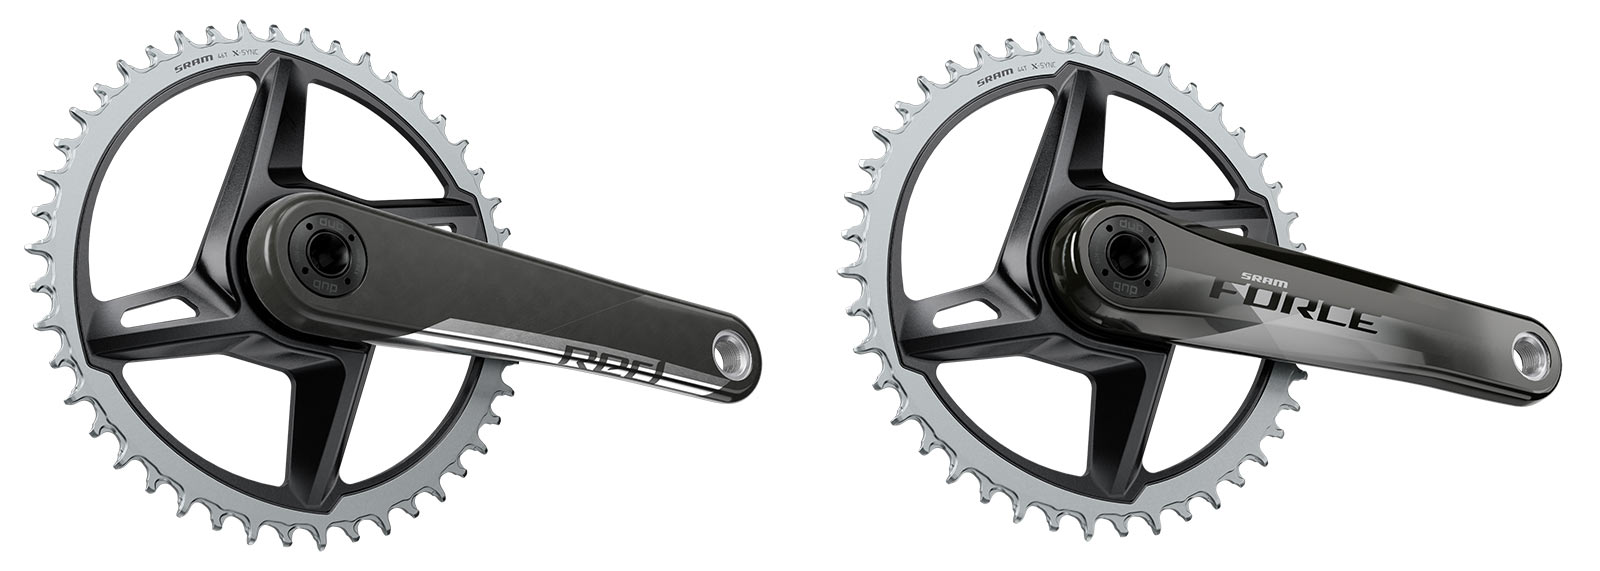 sram 1x gravel bike chainrings for red and force carbon cranksets